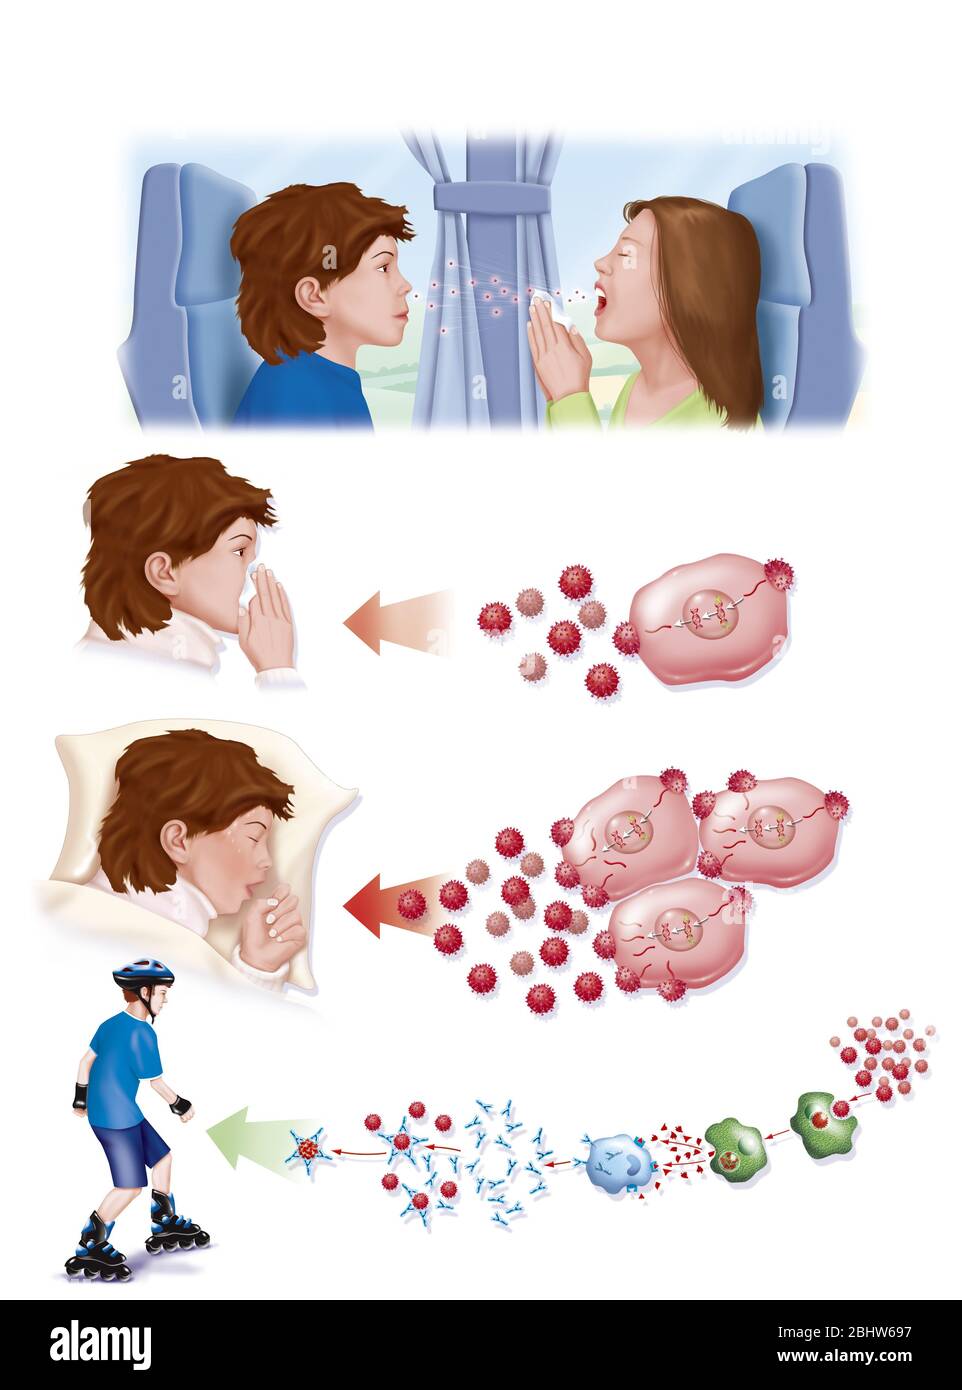 Replication of the cold virus until healing. The story begins with a sick child who coughs and infects the boy in front of her. The virus in the boy's Stock Photo